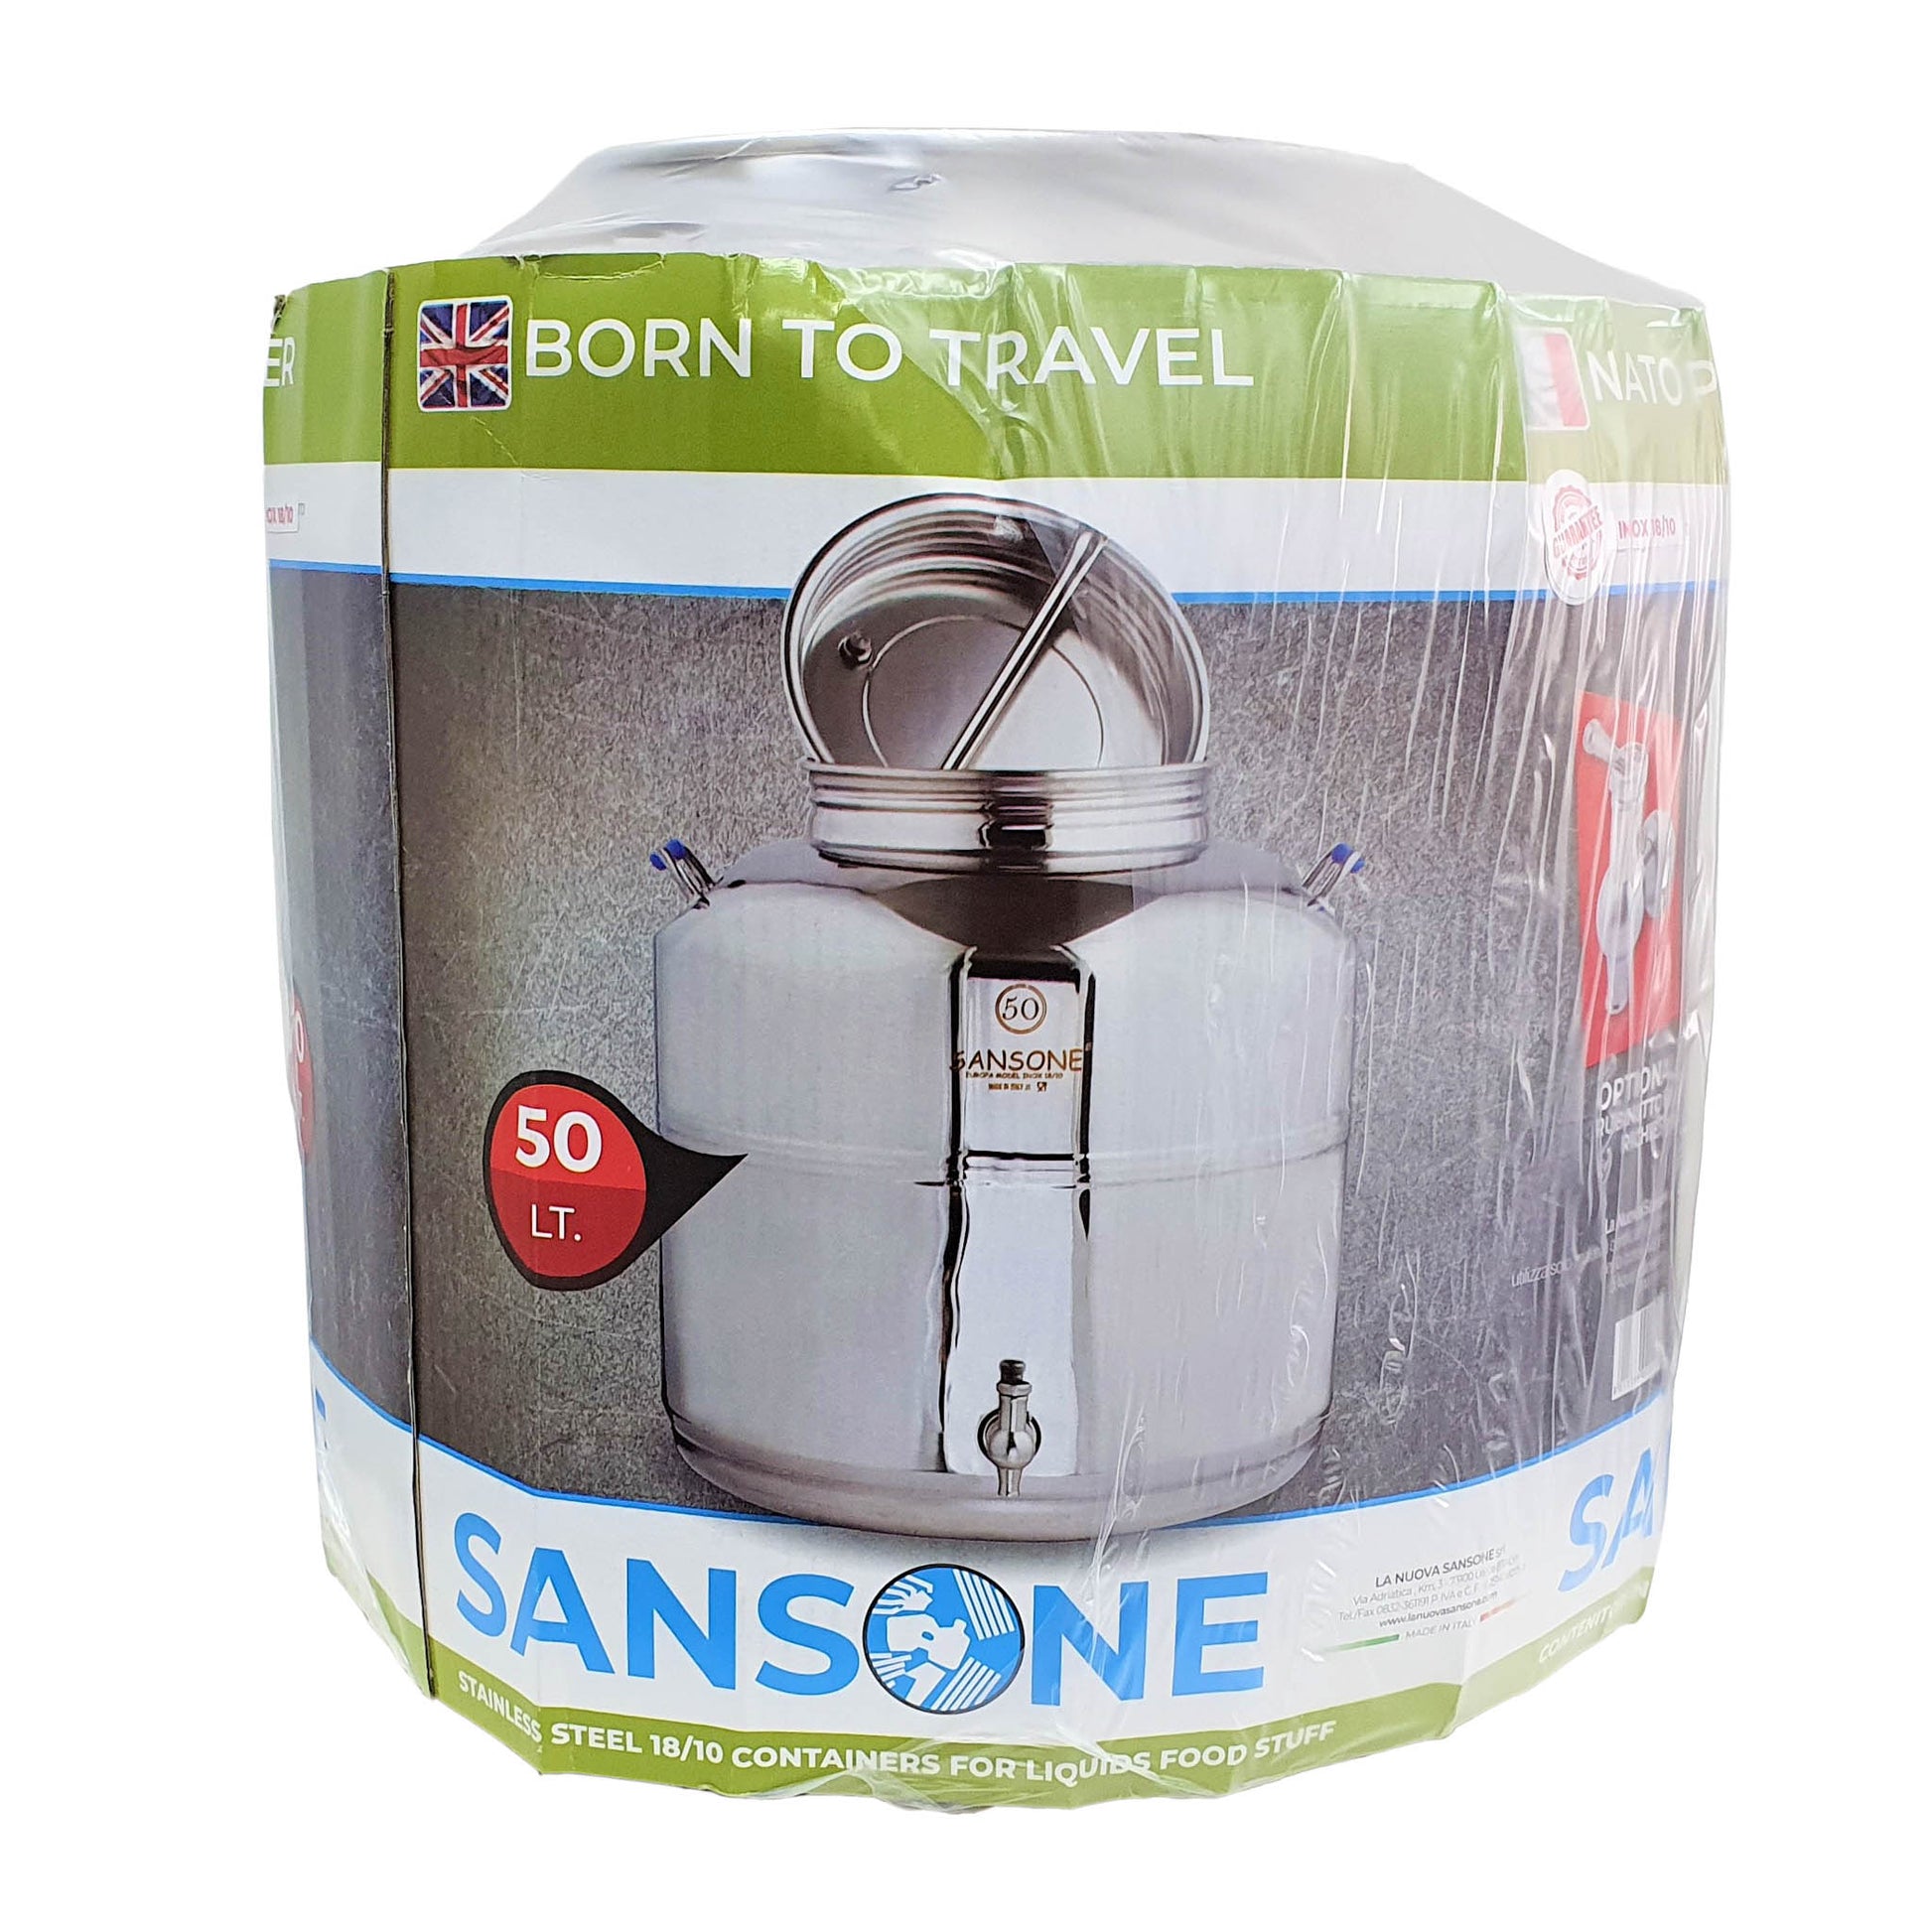 50 litre sansone 18/10 stainless steel olive oil tank for long term storage of olive oil 